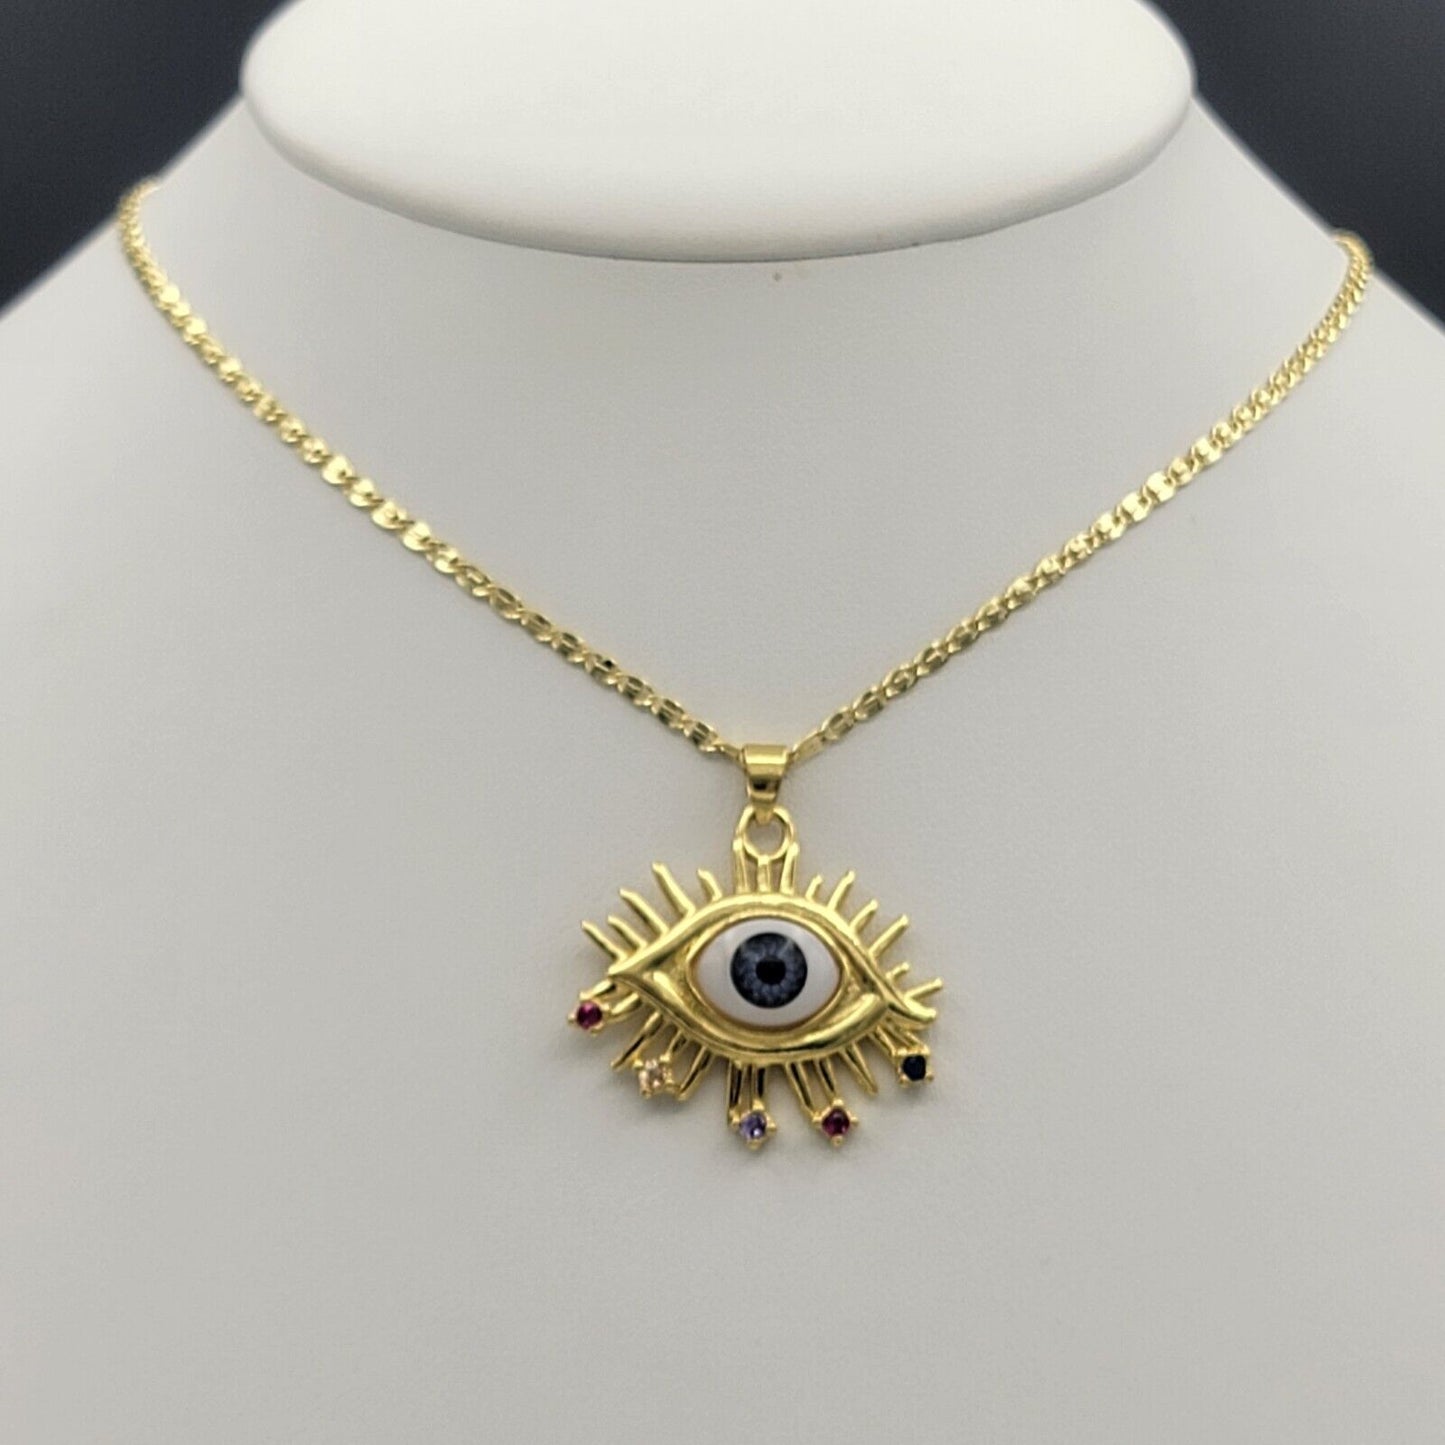 Necklaces - 14K Gold Plated. Blue Eye Pendant & Chain.